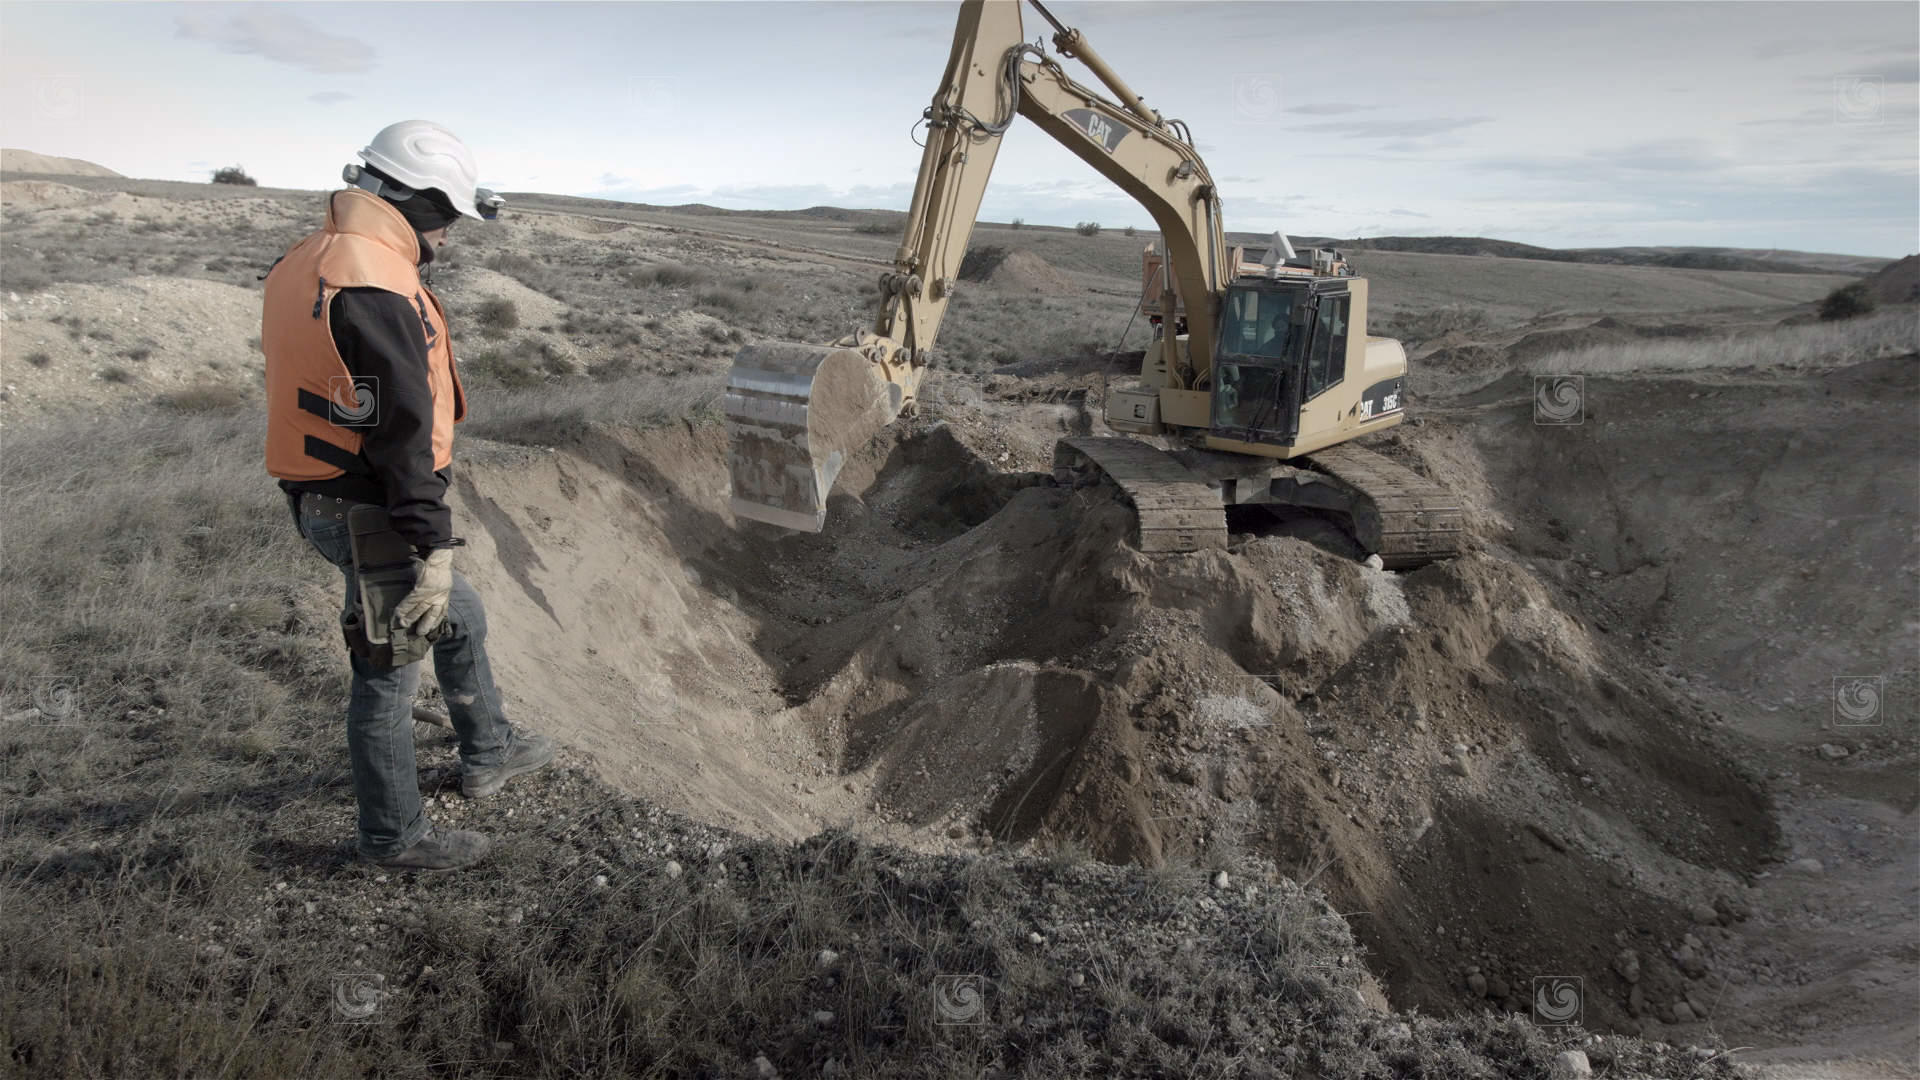 Videoframe showing excavation work fior the decontamination of soil with explosives